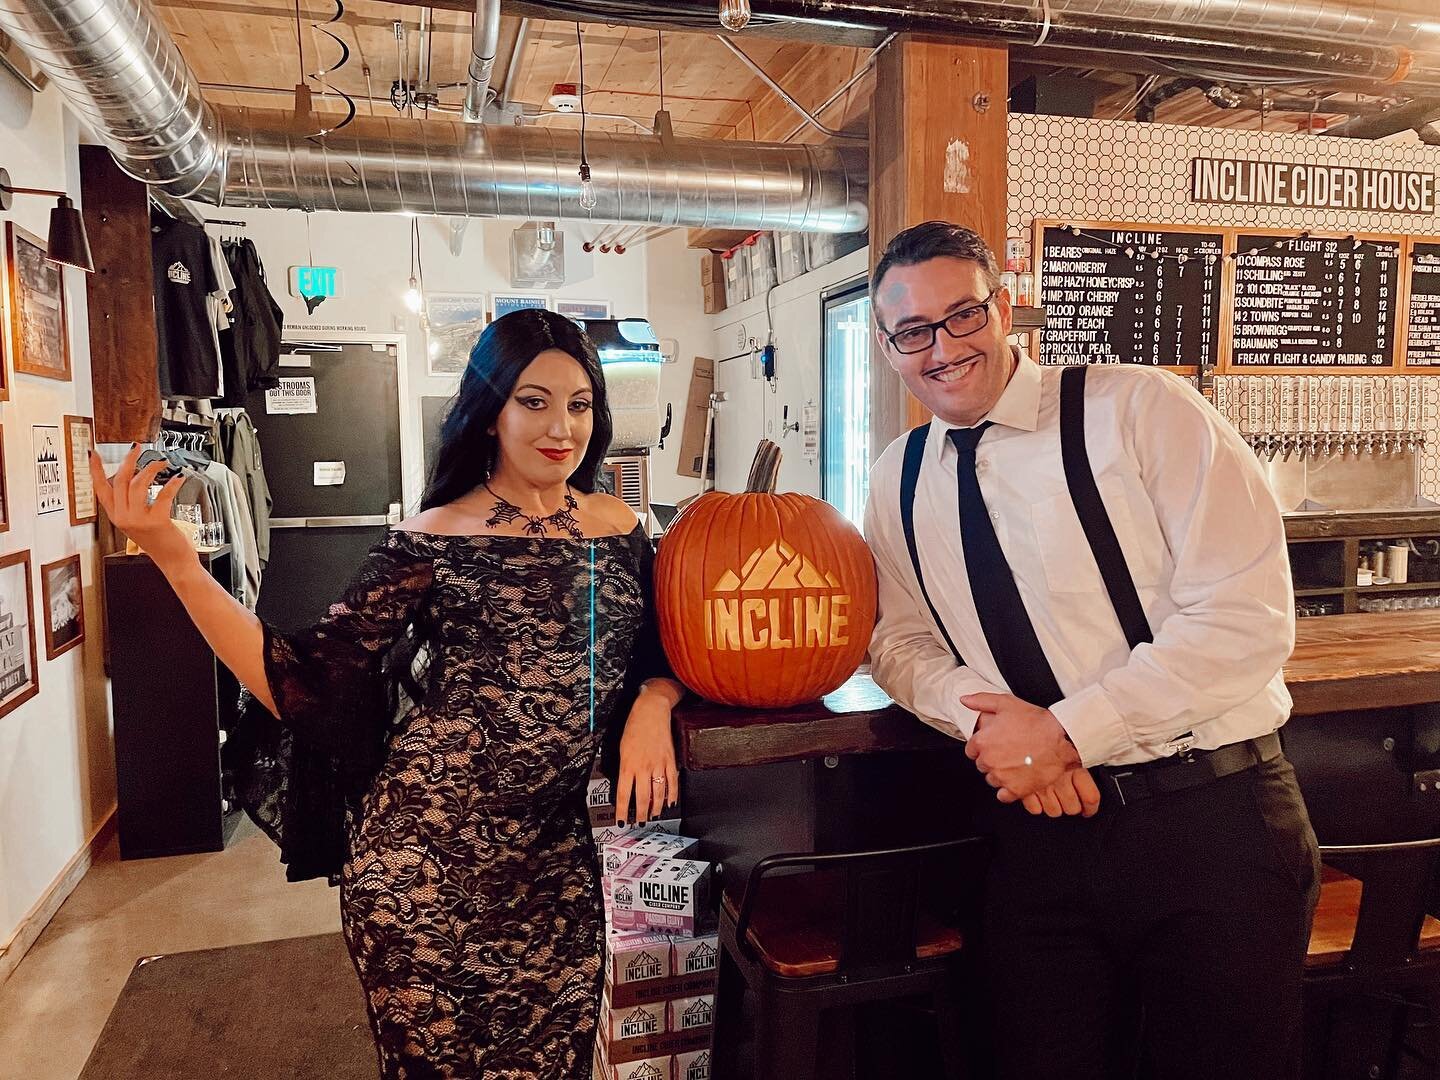 Cheers to all the amazing folks who came to celebrate Halloween with us 🎃 The Halloween flare. The costumes. All the fun. Our best party yet!

We&rsquo;re keeping the Halloween spirit alive this week with @inclinecider &amp; our spirited cider slush